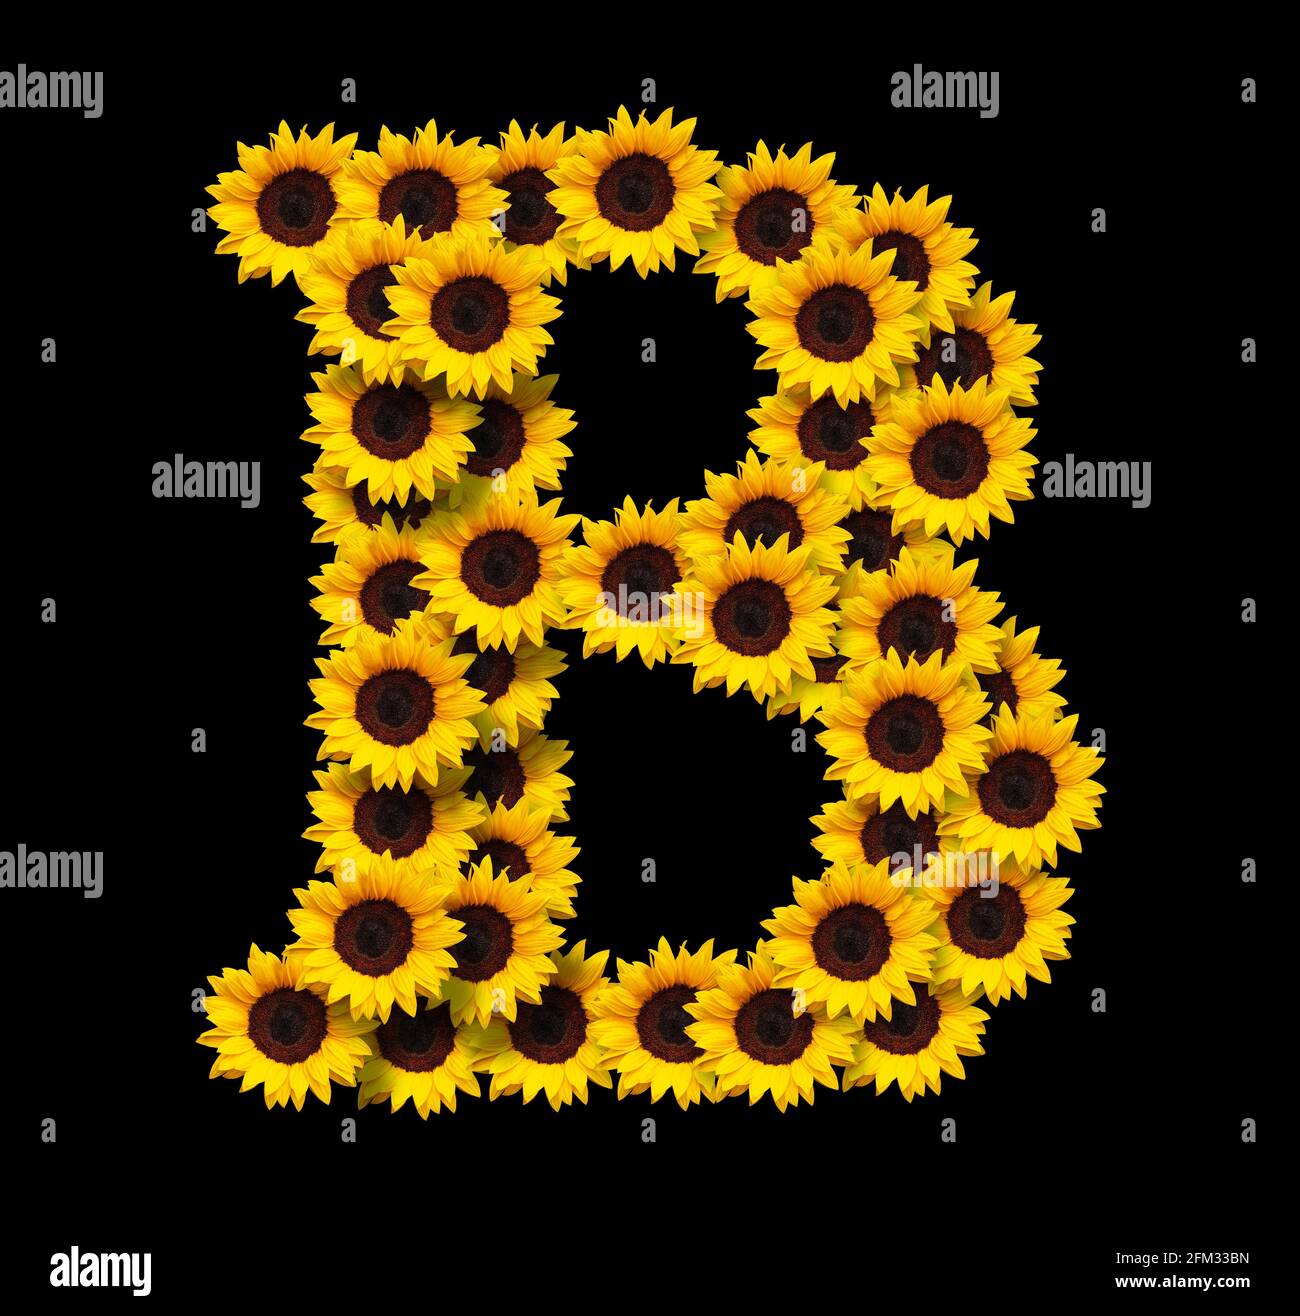 Capital letter B made of yellow sunflowers flowers isolated on black background. Design element for love concepts designs. Ideal for mothers day and s Stock Photo